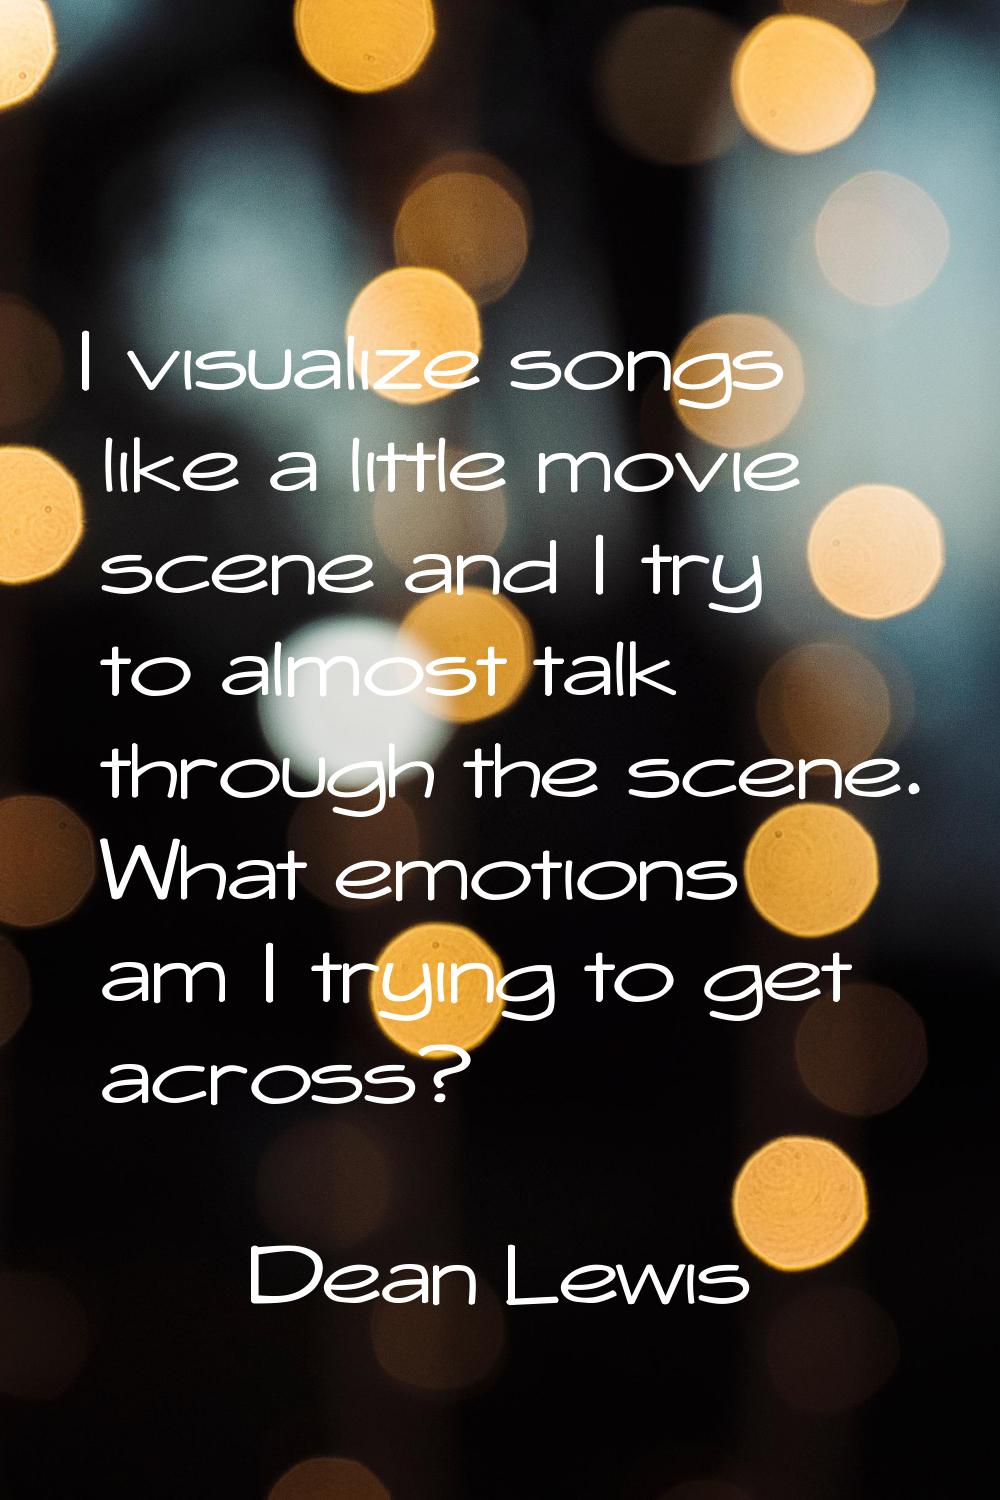 I visualize songs like a little movie scene and I try to almost talk through the scene. What emotio